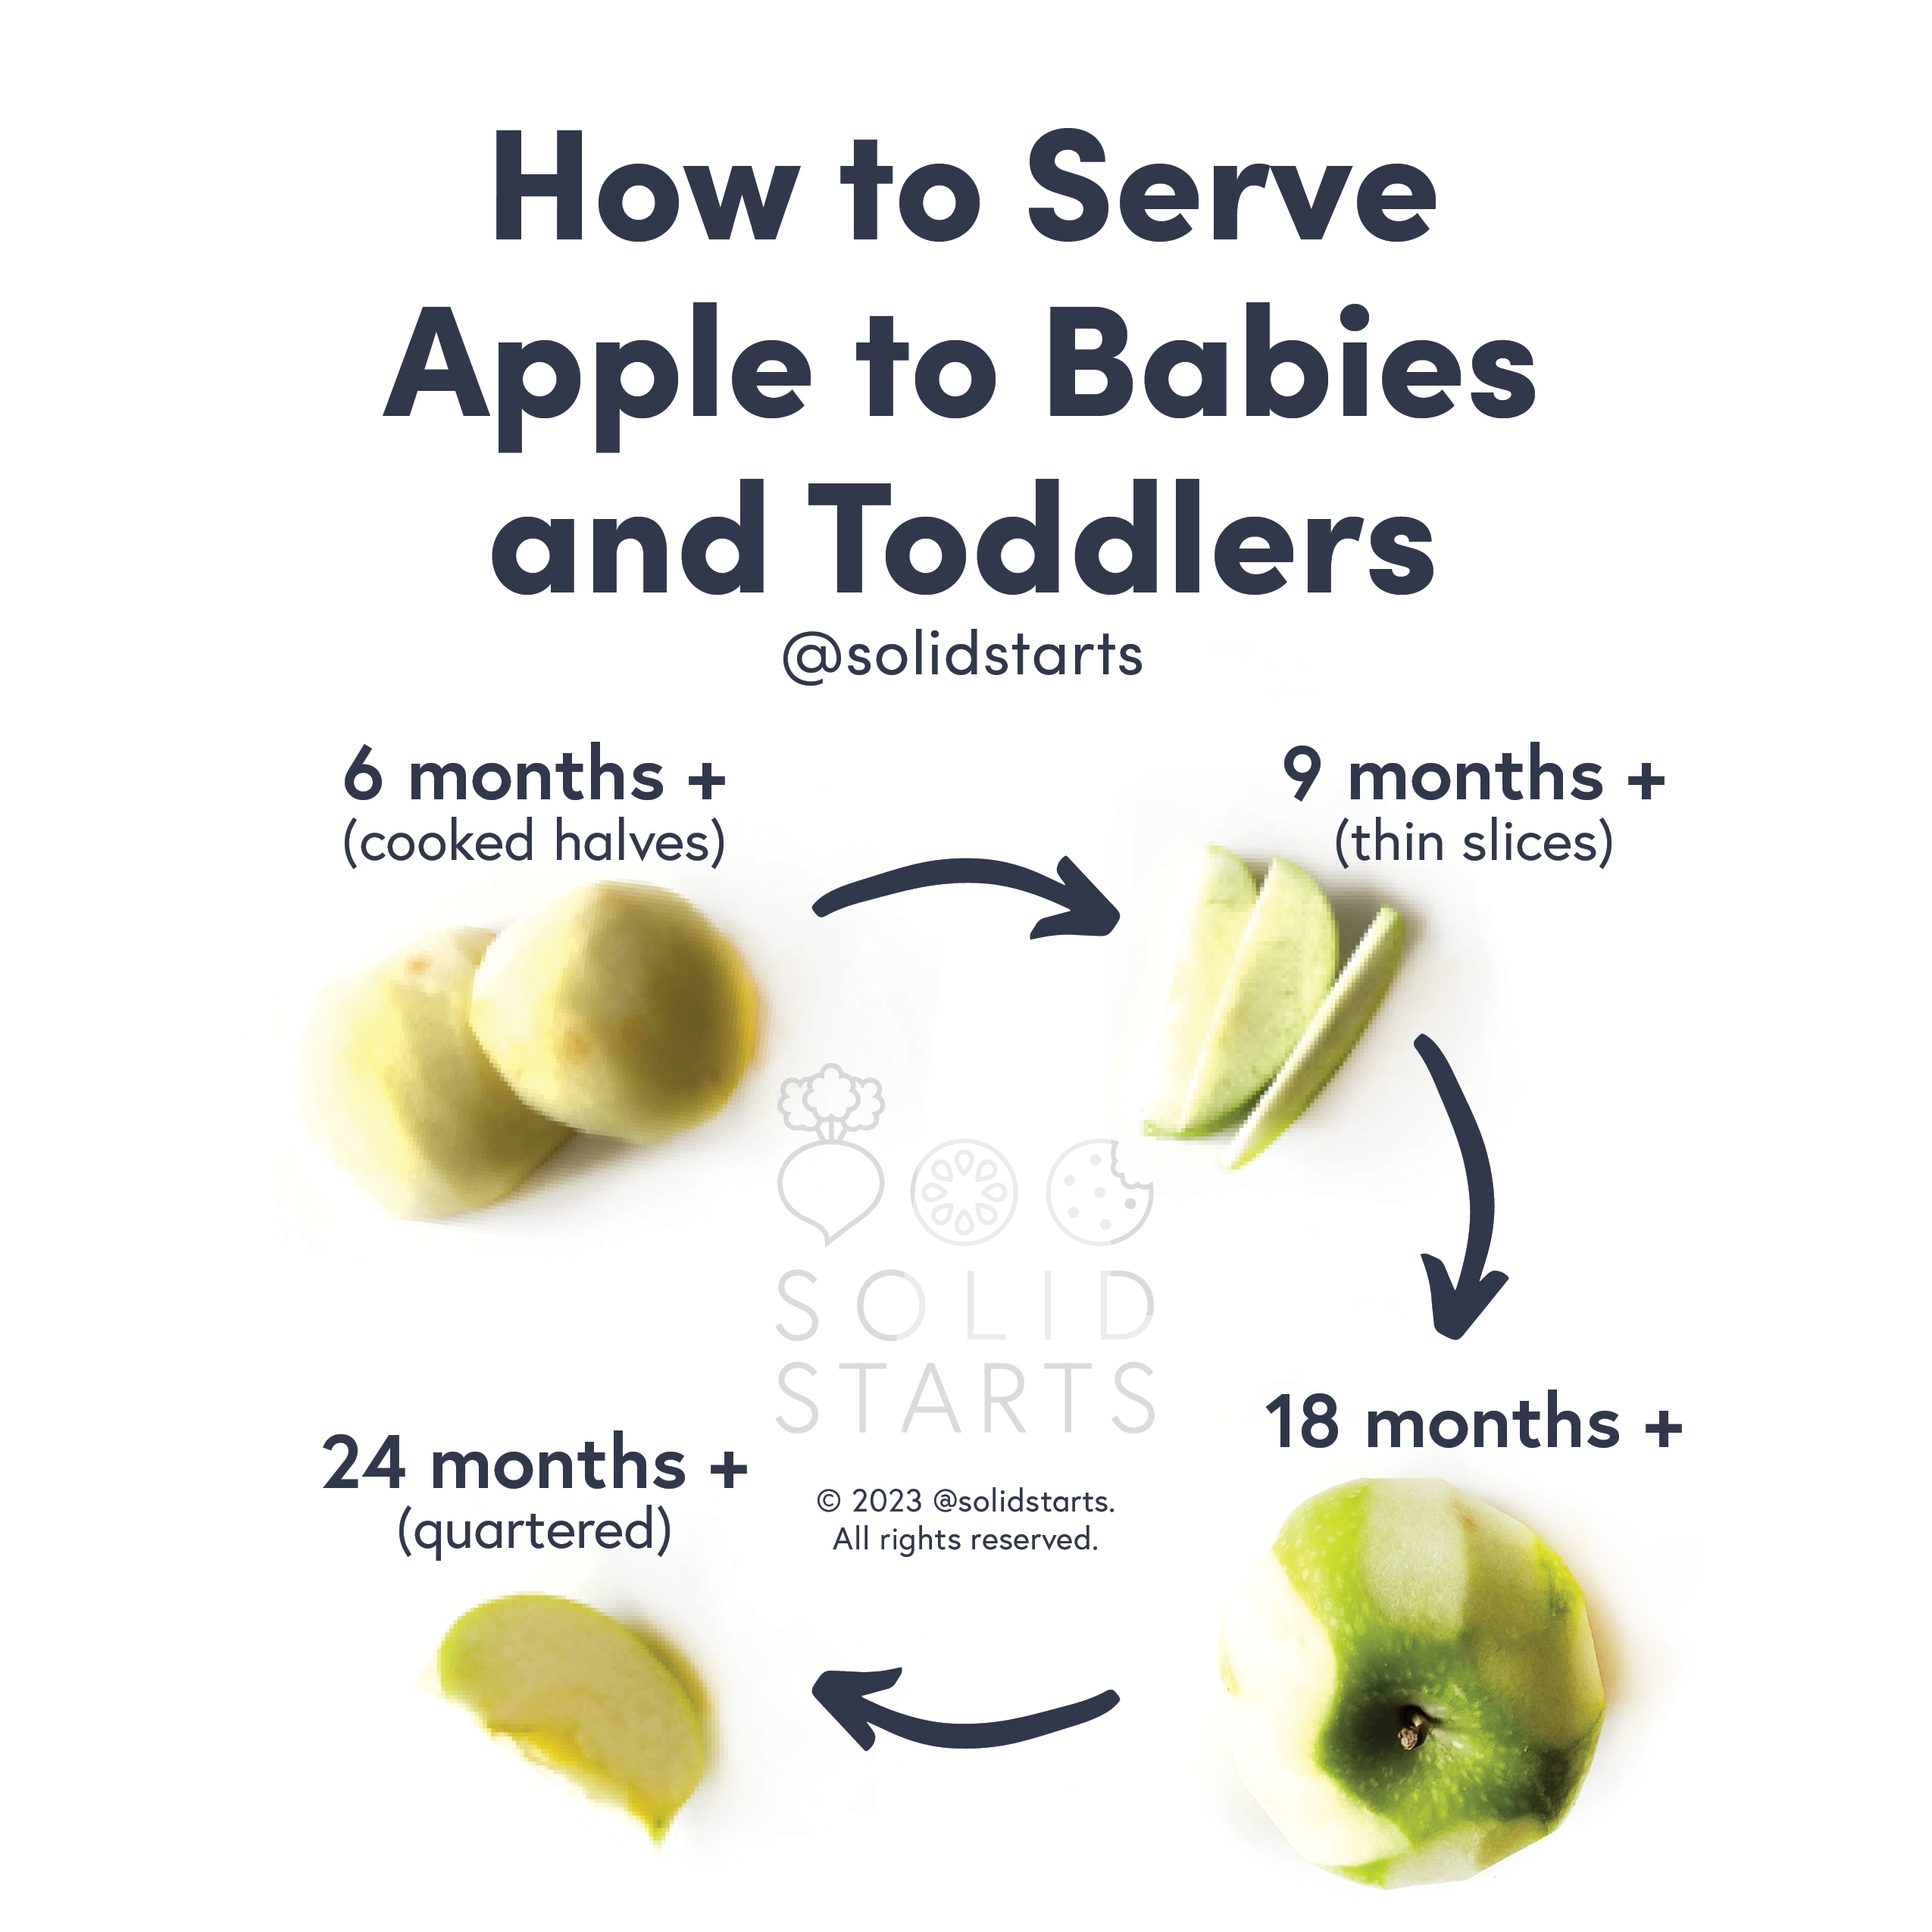 Is apple good for 1 year old?